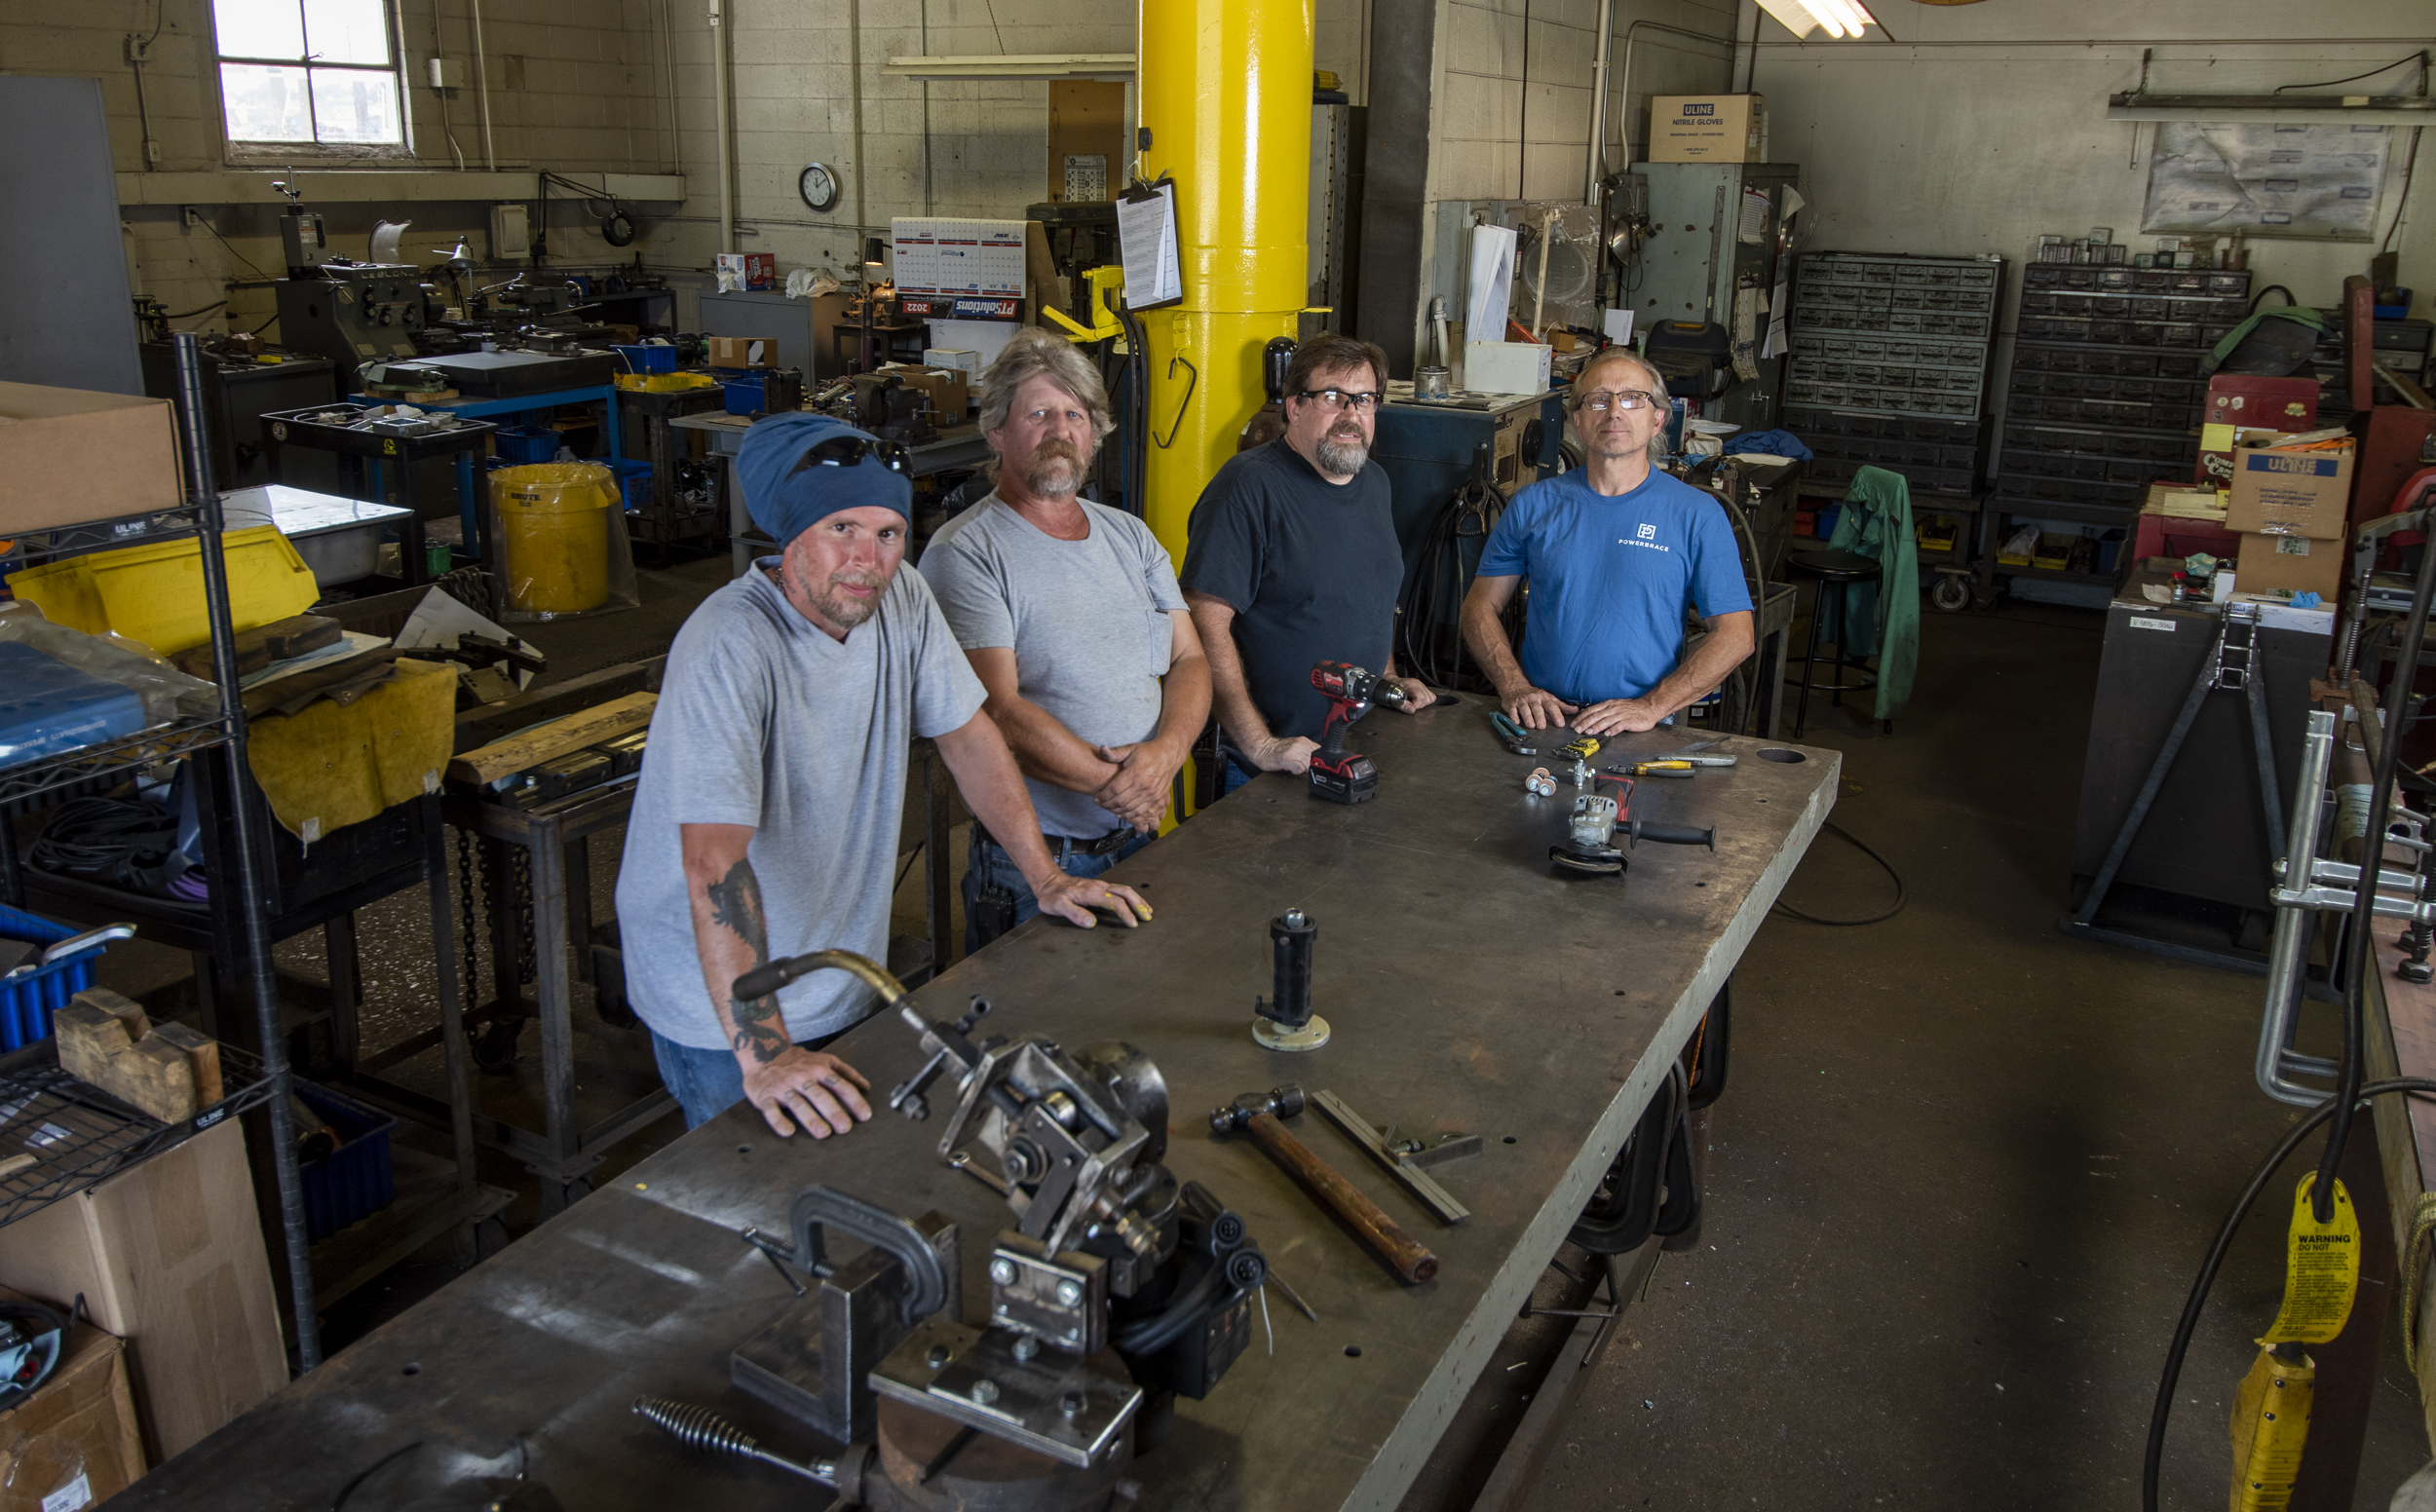 4 maintenance employees in the shop